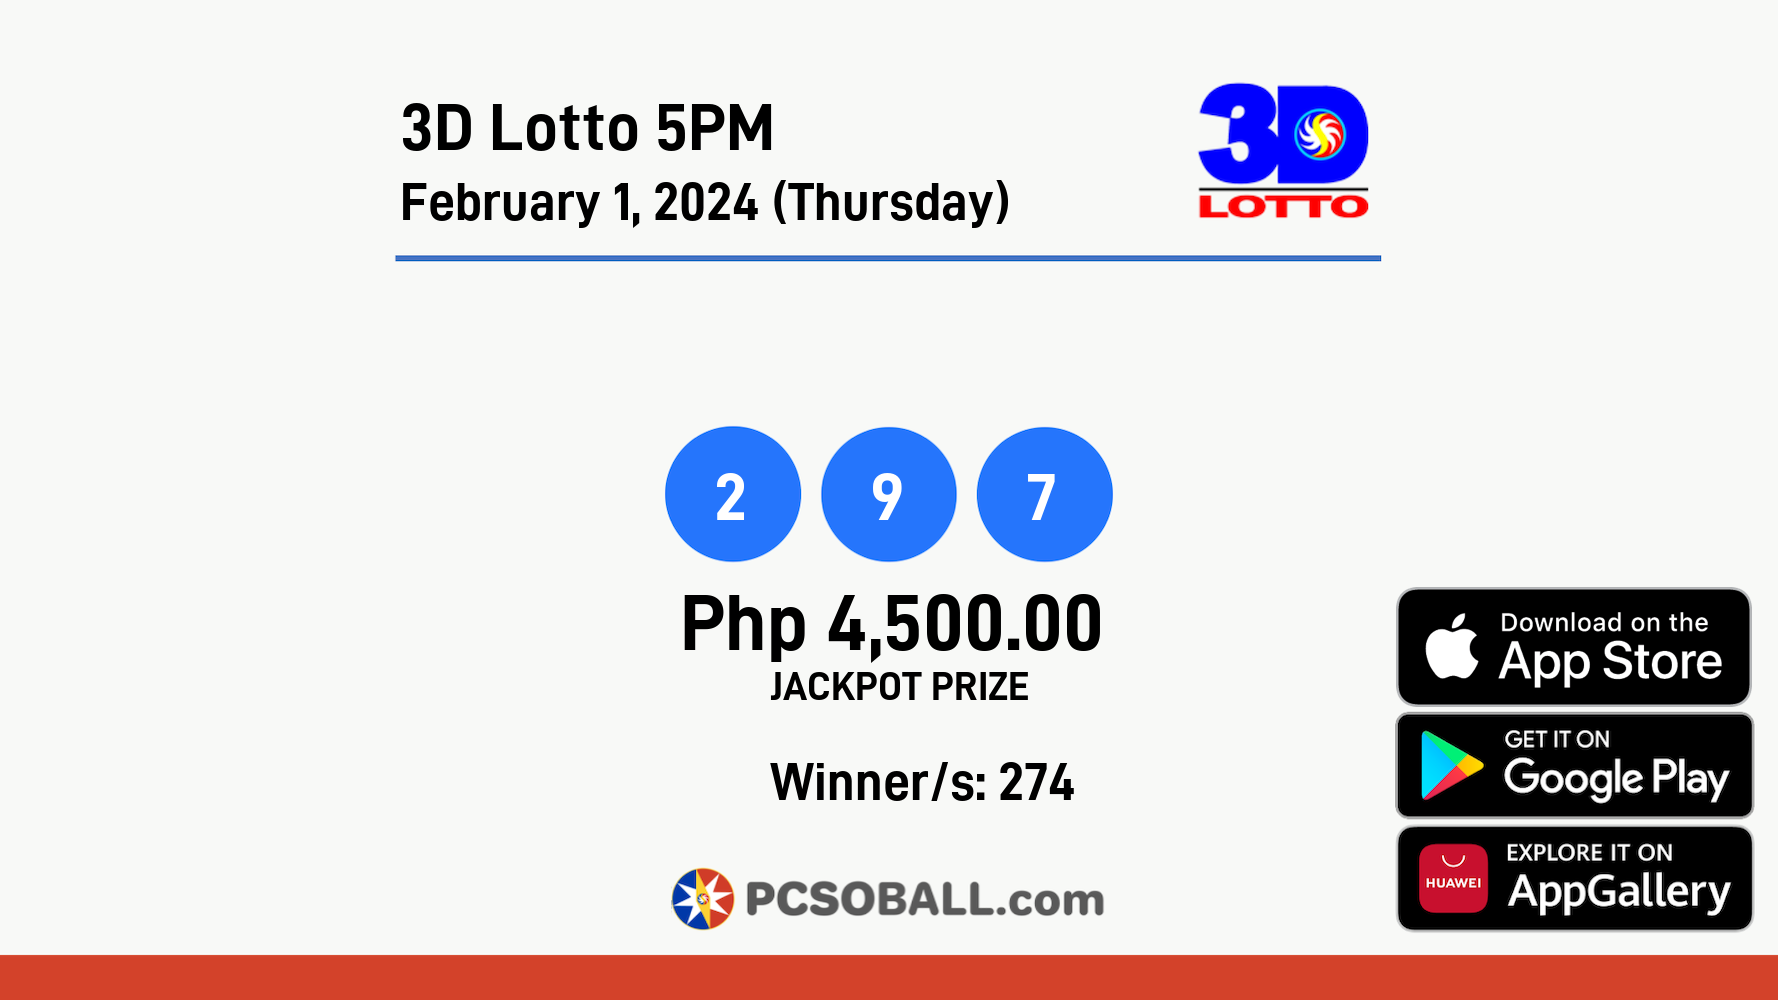 3D Lotto 5PM February 1, 2024 (Thursday) Result